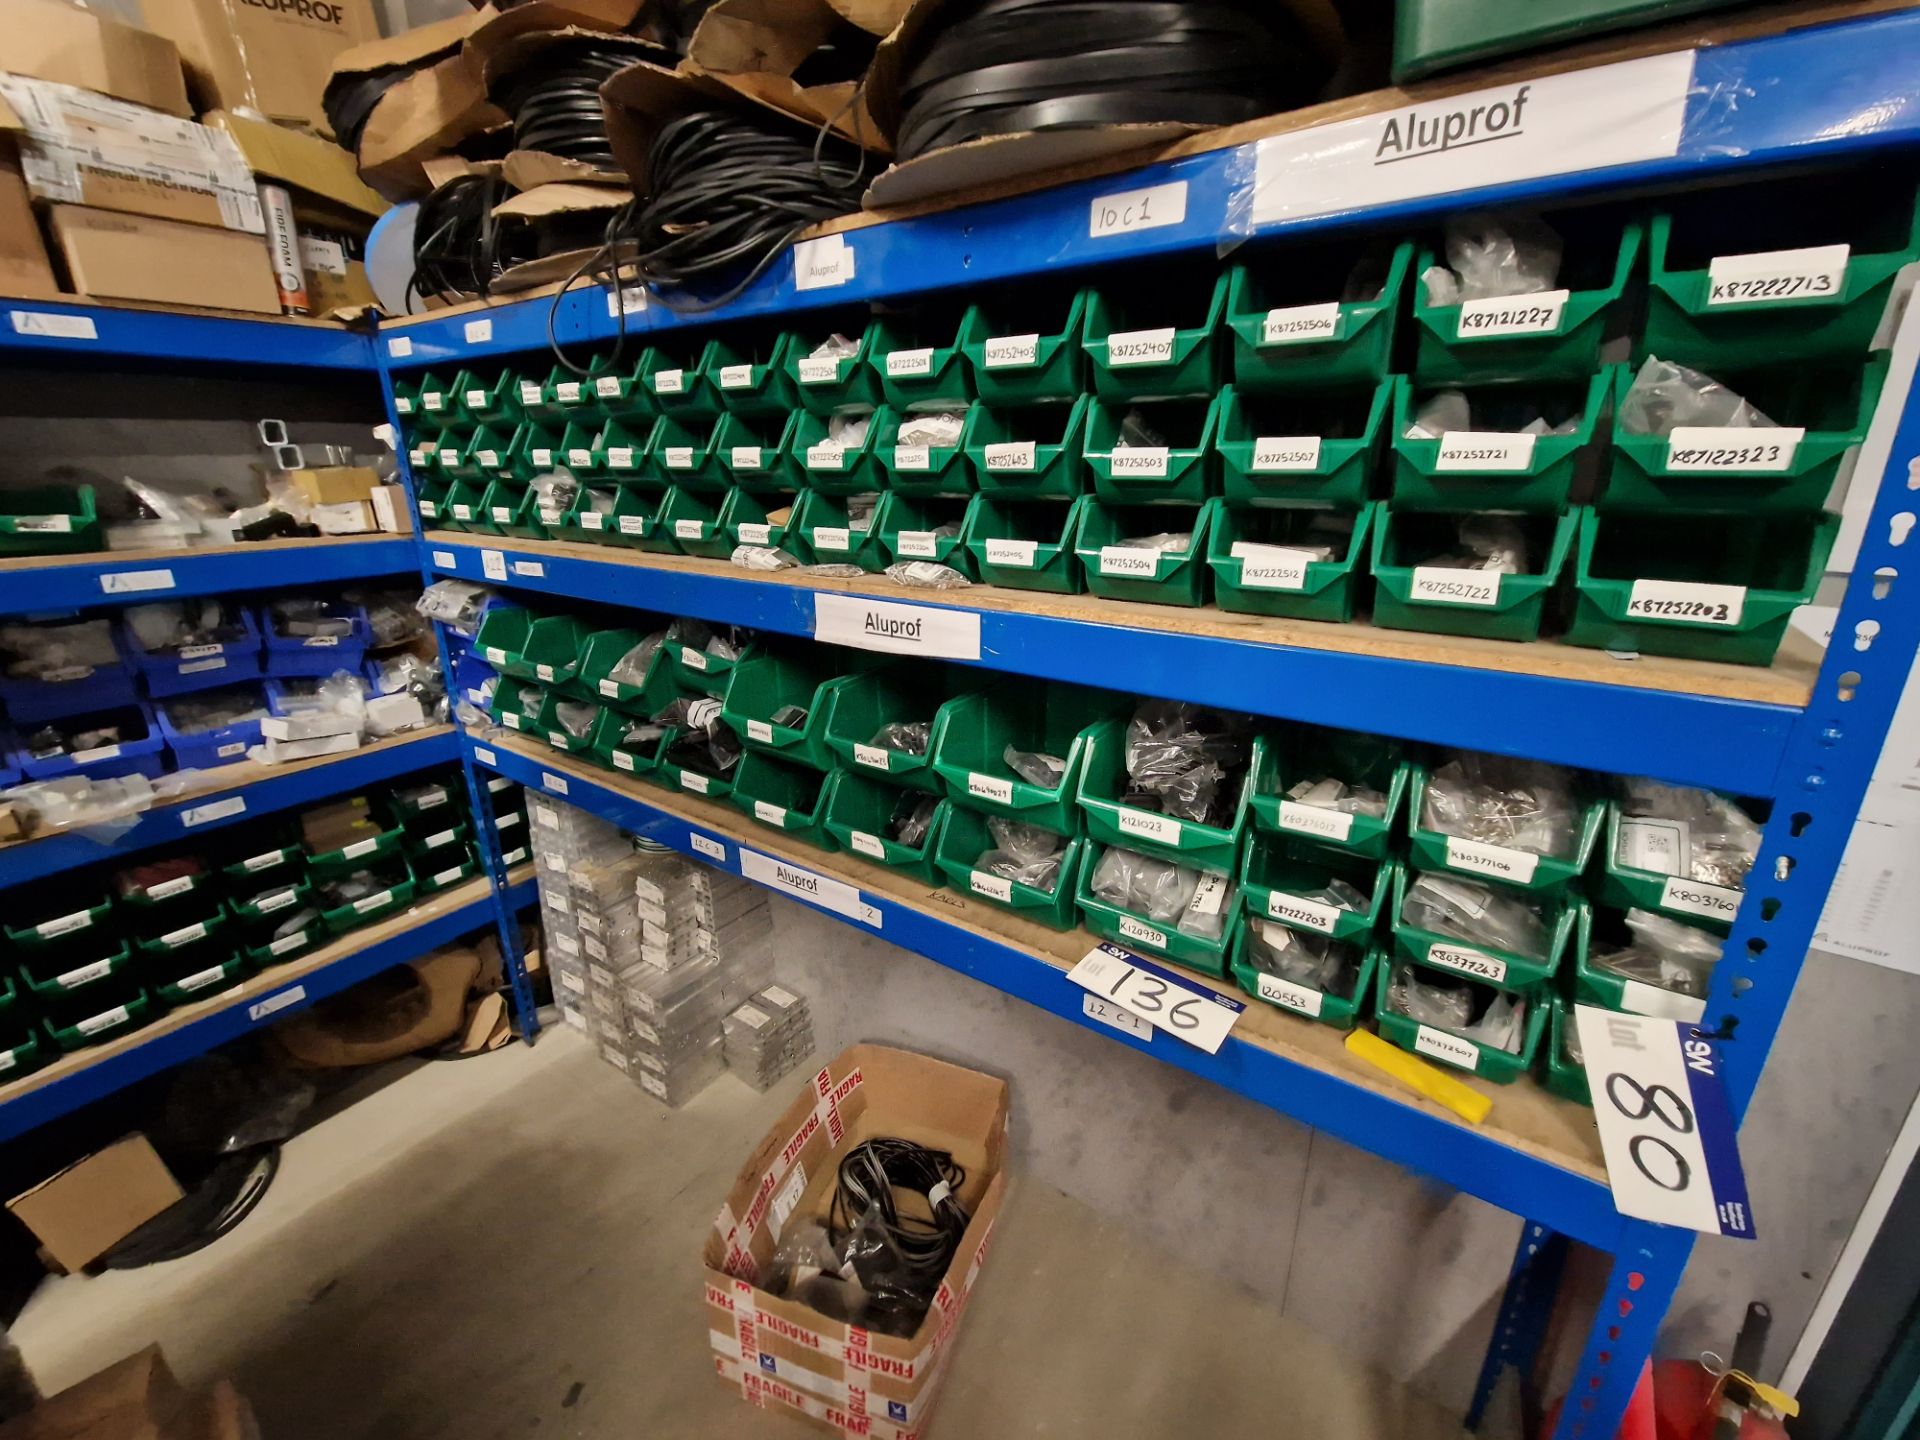 Six Bays of 4 Tier Boltless Steel Shelving, Approx. 2.5m x 0.5m x 2m (Reserve Removal until Contents